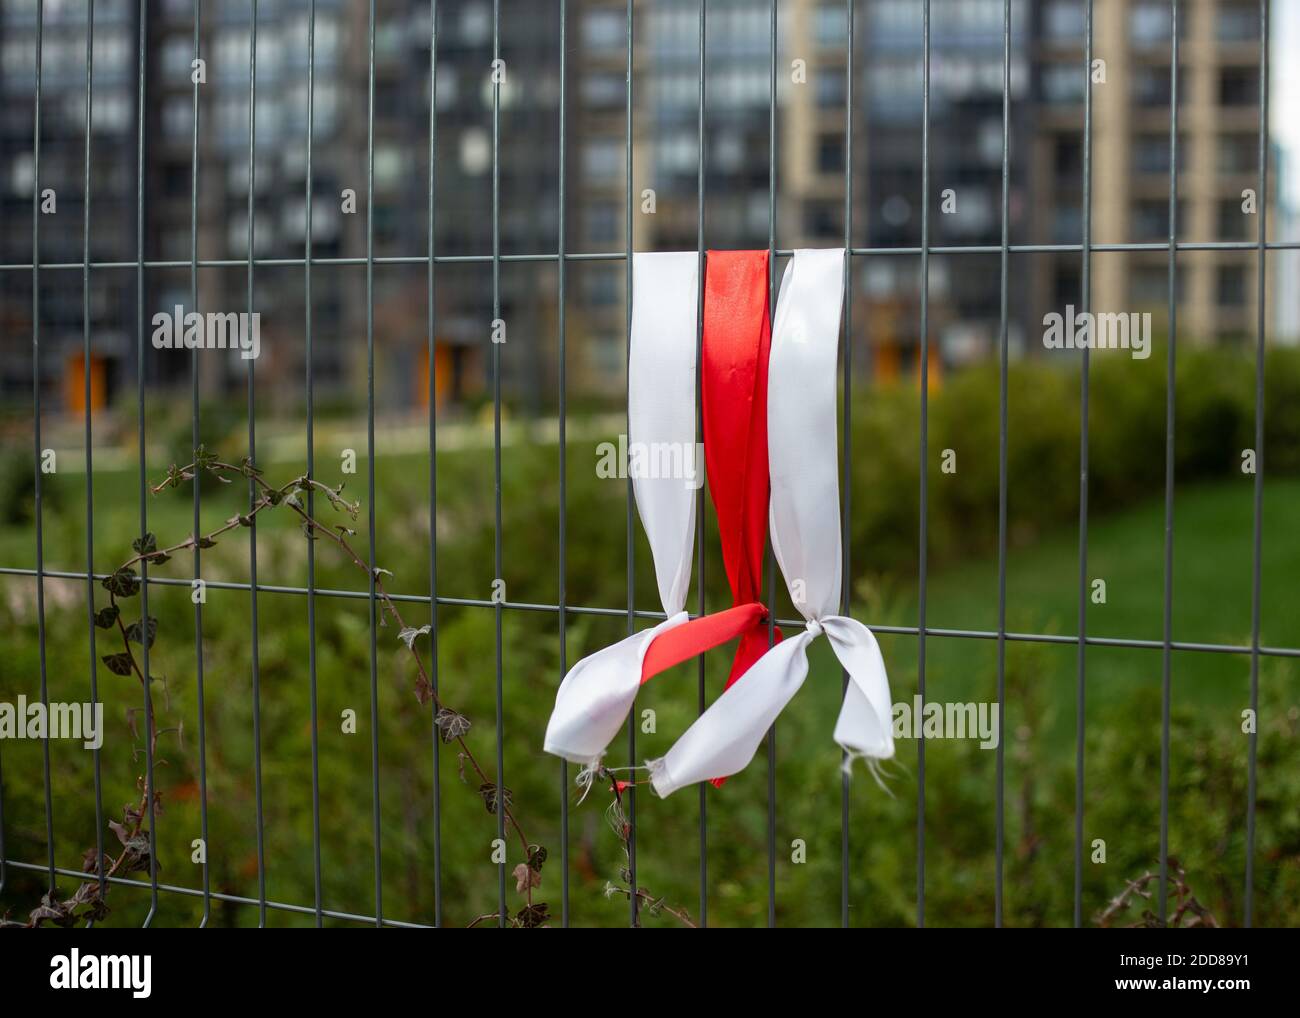 White-red-white ribbons on the fence. White-red-white flag. Stock Photo